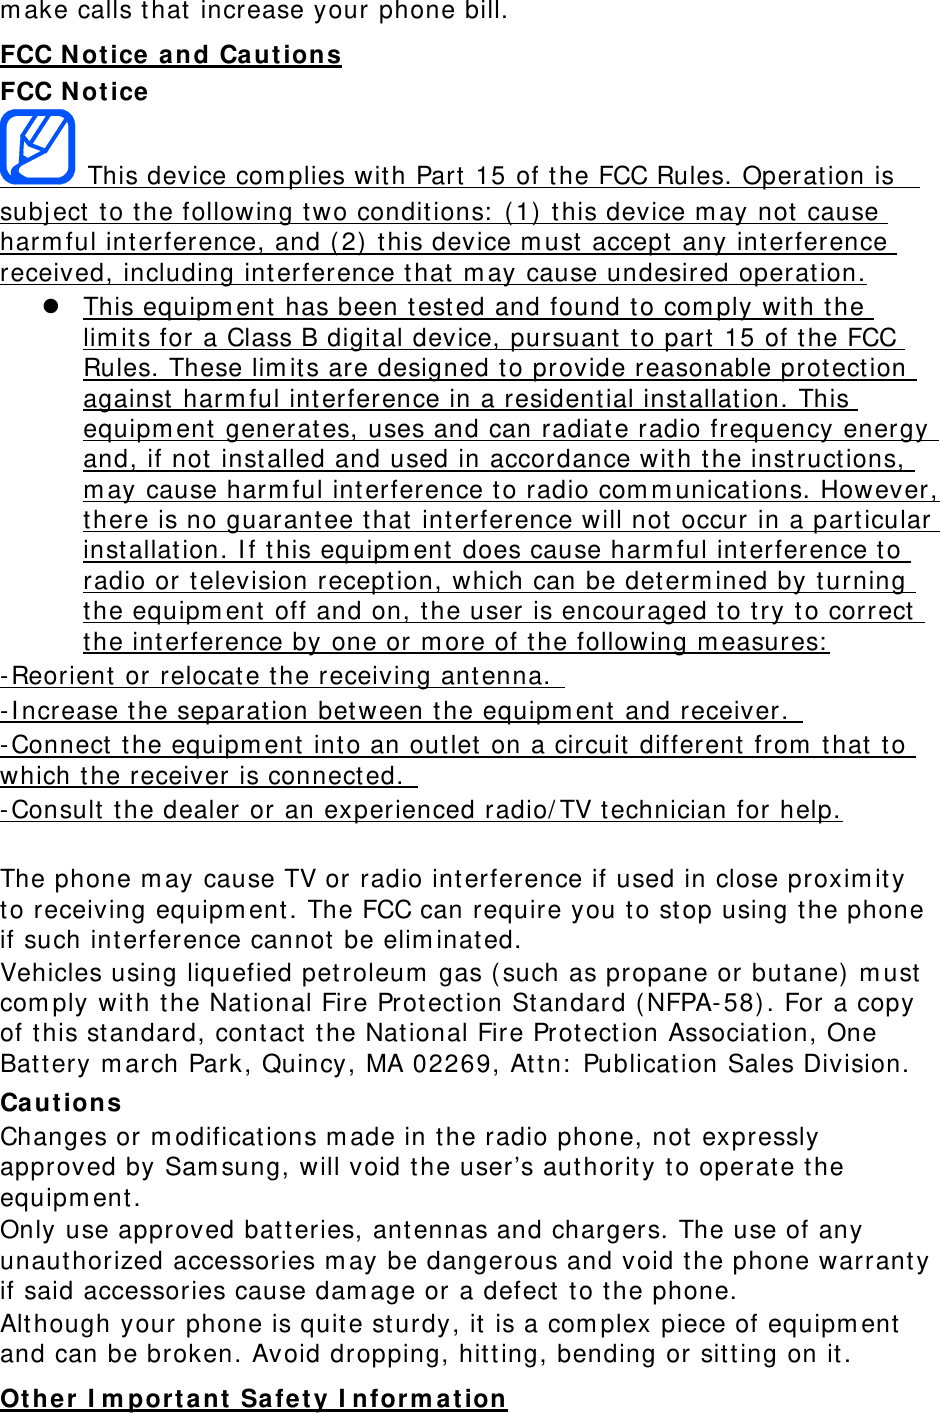 m ake calls t hat  increase your phone bill. FCC N ot ice and Ca ut ions FCC N ot ice  This device com plies with Part 15 of t he FCC Rules. Operat ion is   subj ect  to t he following t wo conditions:  (1)  this device m ay not  cause harm ful interference, and (2)  this device m ust  accept  any interference received, including interference t hat  m ay cause undesired operat ion.  This equipm ent  has been t est ed and found t o com ply with the lim its for a Class B digit al device, pursuant  t o part 15 of t he FCC Rules. These lim it s are designed t o provide reasonable protection against  harm ful interference in a resident ial inst allation. This equipm ent  generat es, uses and can radiat e radio frequency energy and, if not  inst alled and used in accordance wit h t he inst ruct ions, m ay cause harm ful interference t o radio com m unicat ions. However, there is no guarantee t hat  interference will not  occur in a particular inst allat ion. I f t his equipm ent does cause harm ful int erference t o radio or t elevision recept ion, which can be determ ined by t urning the equipm ent  off and on, the user is encouraged to try t o correct  the int erference by one or m ore of the following m easures:  - Reorient or relocat e t he receiving antenna.   - I ncrease t he separat ion bet ween t he equipm ent and receiver.   - Connect  the equipm ent int o an out let  on a circuit different  from  t hat  to which t he receiver is connect ed.   - Consult t he dealer or an experienced radio/ TV technician for help.  The phone m ay cause TV or radio interference if used in close proxim it y to receiving equipm ent. The FCC can require you t o st op using t he phone if such int erference cannot be elim inat ed. Vehicles using liquefied pet roleum  gas (such as propane or but ane)  m ust  com ply wit h t he Nat ional Fire Prot ect ion St andard (NFPA- 58). For a copy of t his st andard, cont act  the National Fire Prot ect ion Associat ion, One Bat tery m arch Park, Quincy, MA 02269, Att n:  Publication Sales Division. Ca ut ion s Changes or m odificat ions m ade in t he radio phone, not  expressly approved by Sam sung, will void the user’s aut hority to operate t he equipm ent . Only use approved bat t eries, ant ennas and chargers. The use of any unauthorized accessories m ay be dangerous and void t he phone warrant y if said accessories cause dam age or a defect  t o the phone. Although your phone is quit e st urdy, it  is a com plex piece of equipm ent  and can be broken. Avoid dropping, hit t ing, bending or sit t ing on it. Ot her I m port a n t  Sa fet y I nfor m ation 